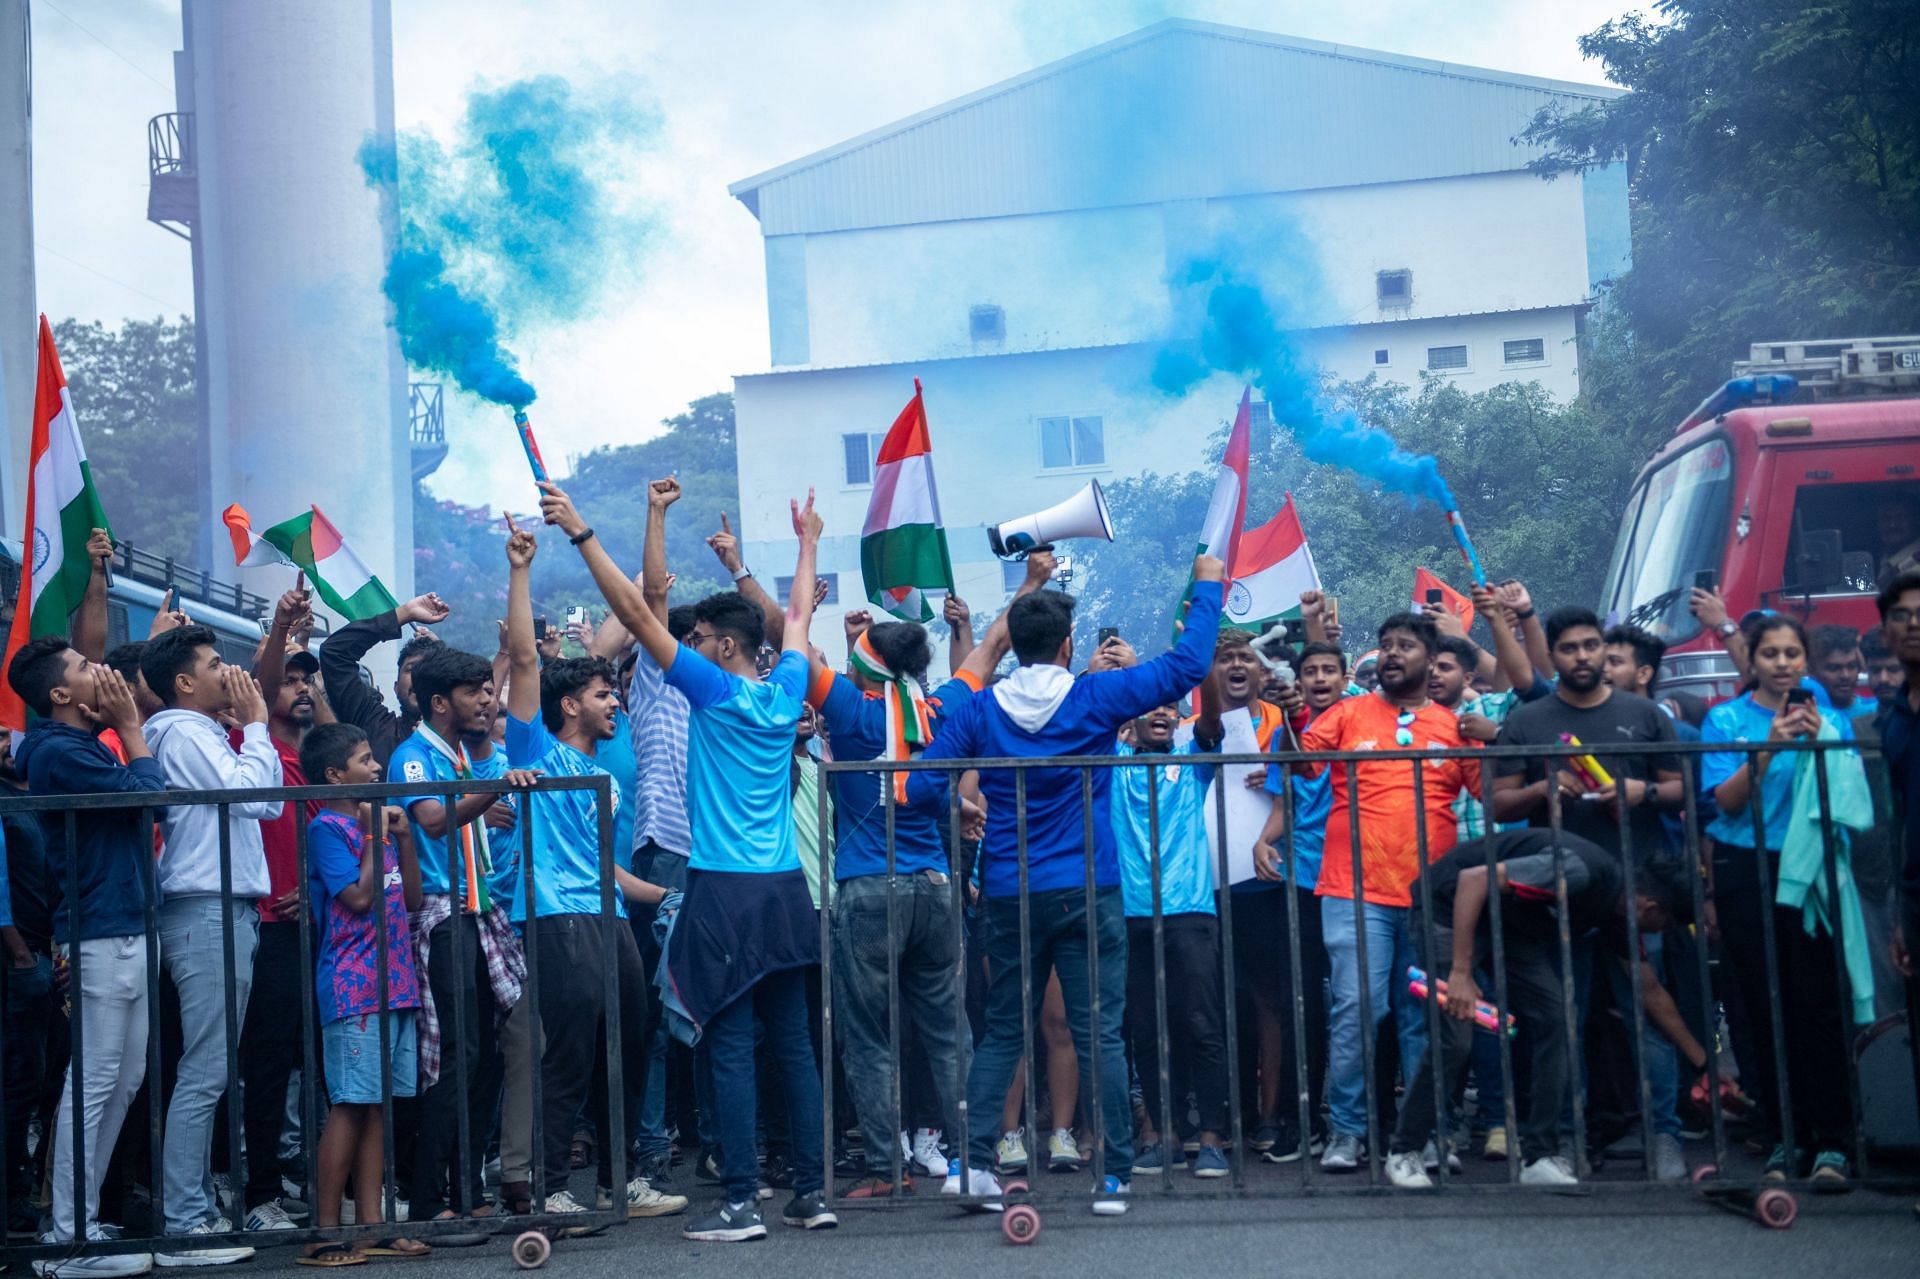 The Indian football faithful have turned up in numbers for the SAFF Championship 2023 Final (Image: Twitter/@IndianFootball)